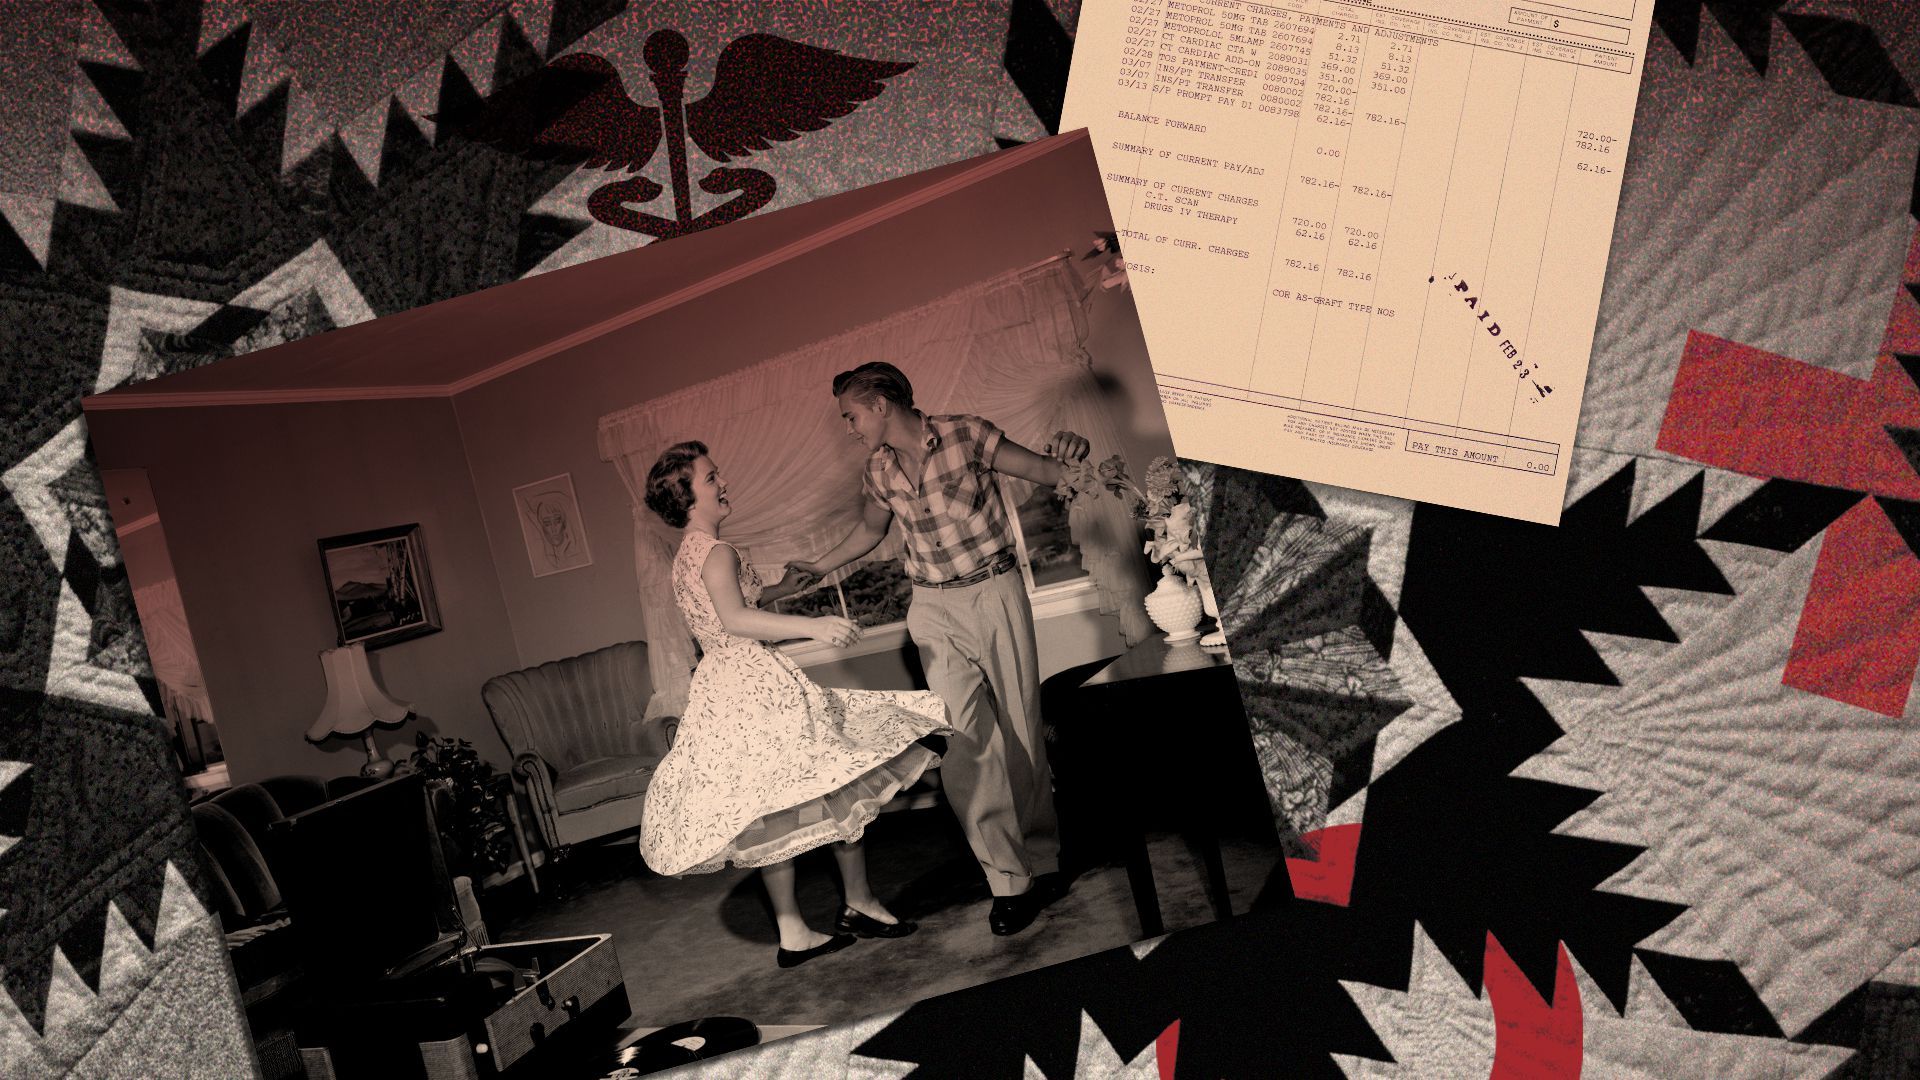 Photo collage of a photo of a couple from the 1950s dancing, with medical crosses, a medical bill and a quilt texture.